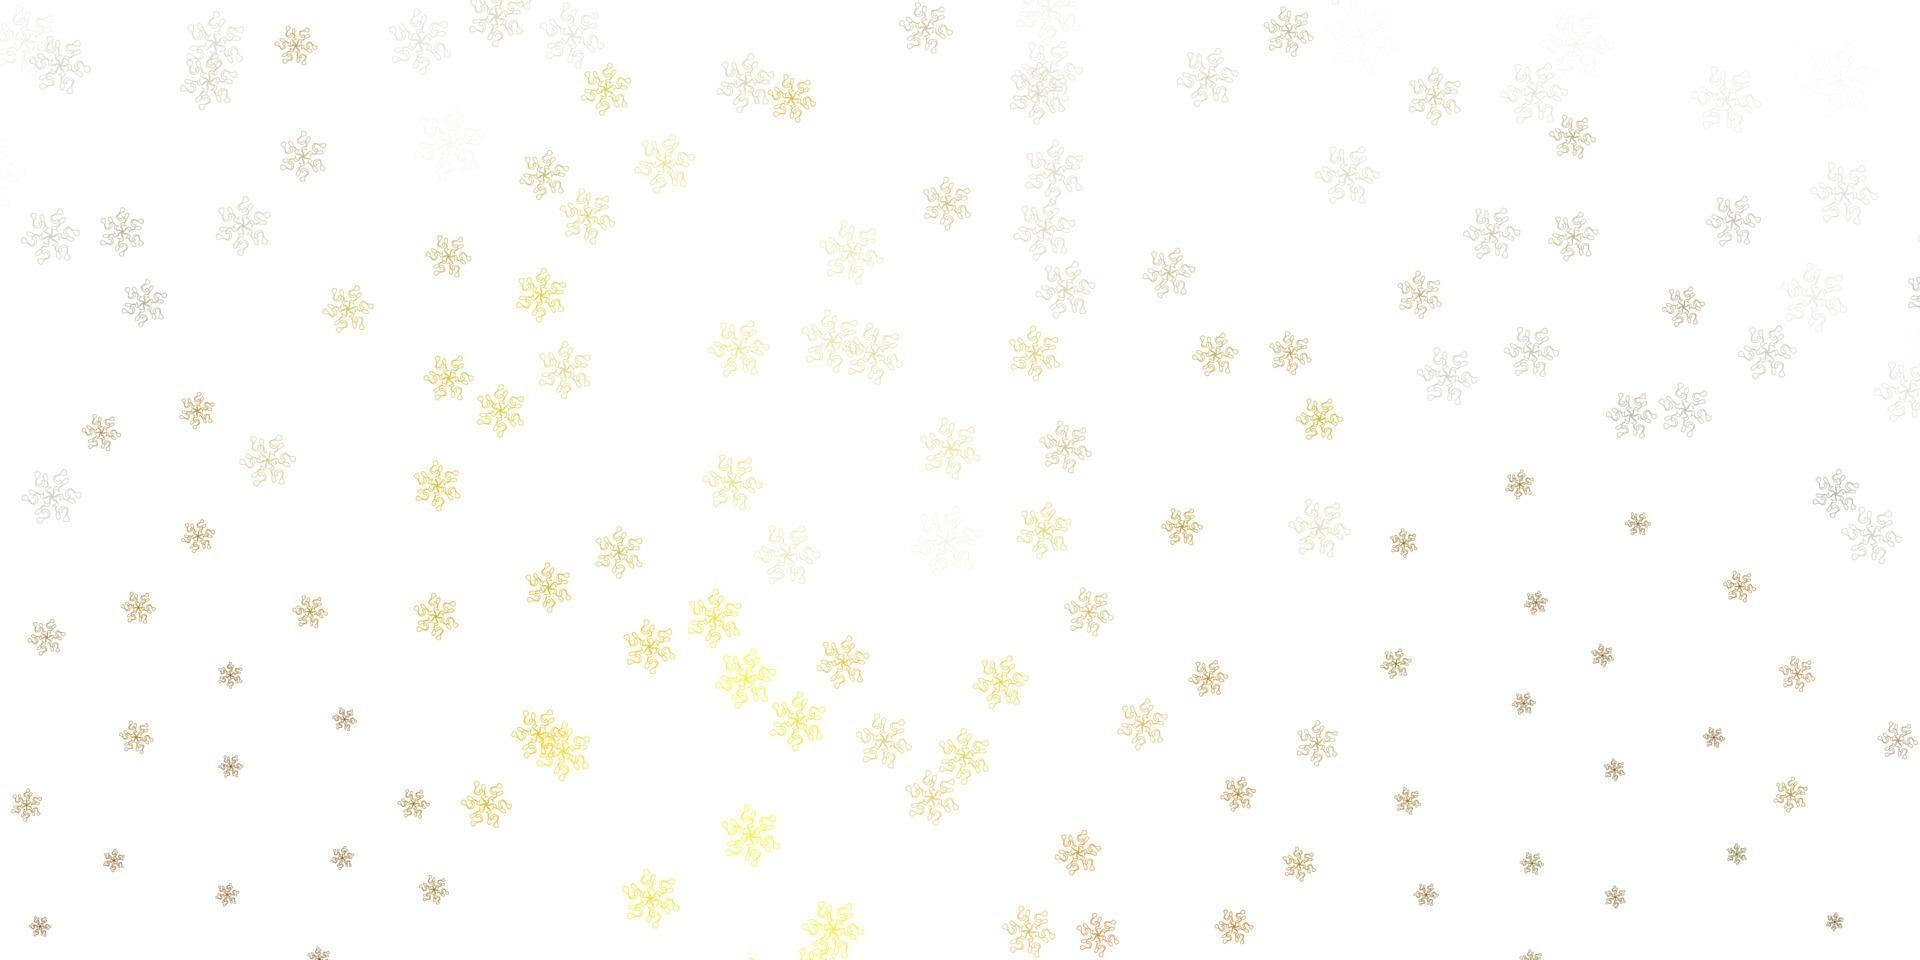 Light green, yellow vector doodle texture with flowers.